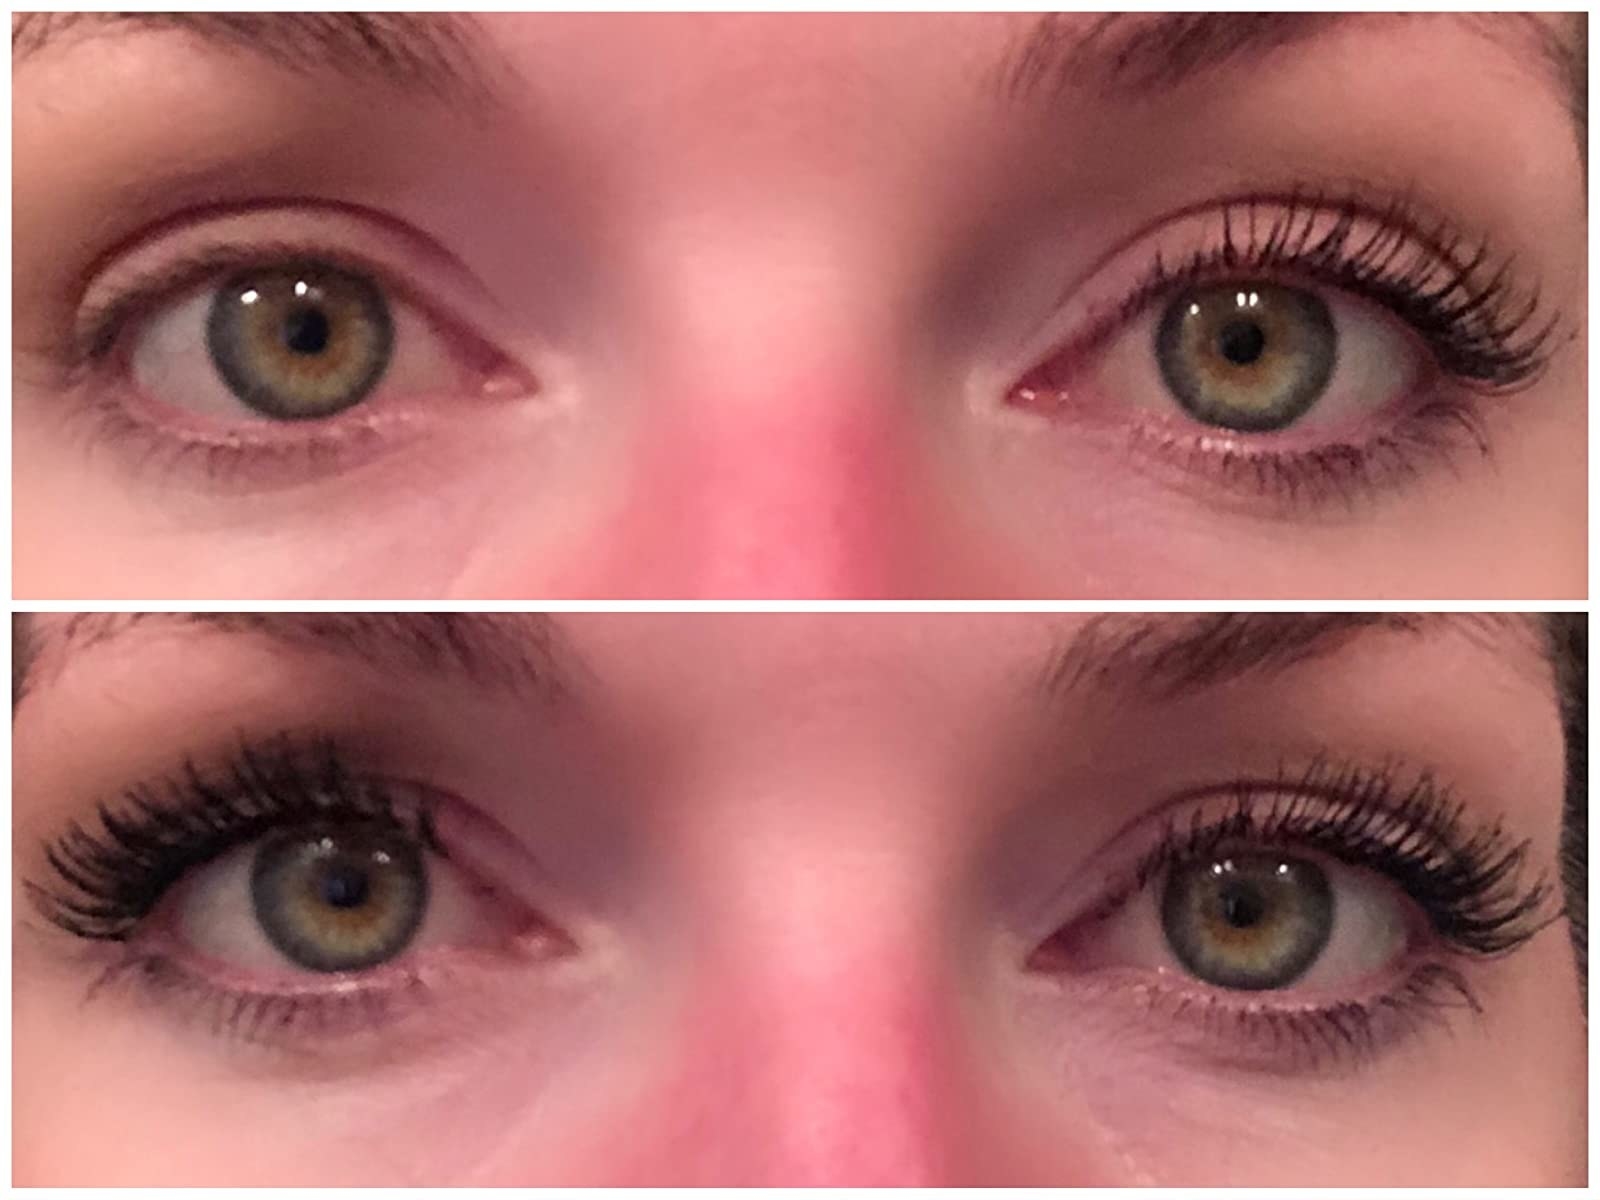 A reviewer showing a before/after with longer, thicker, lashes after use